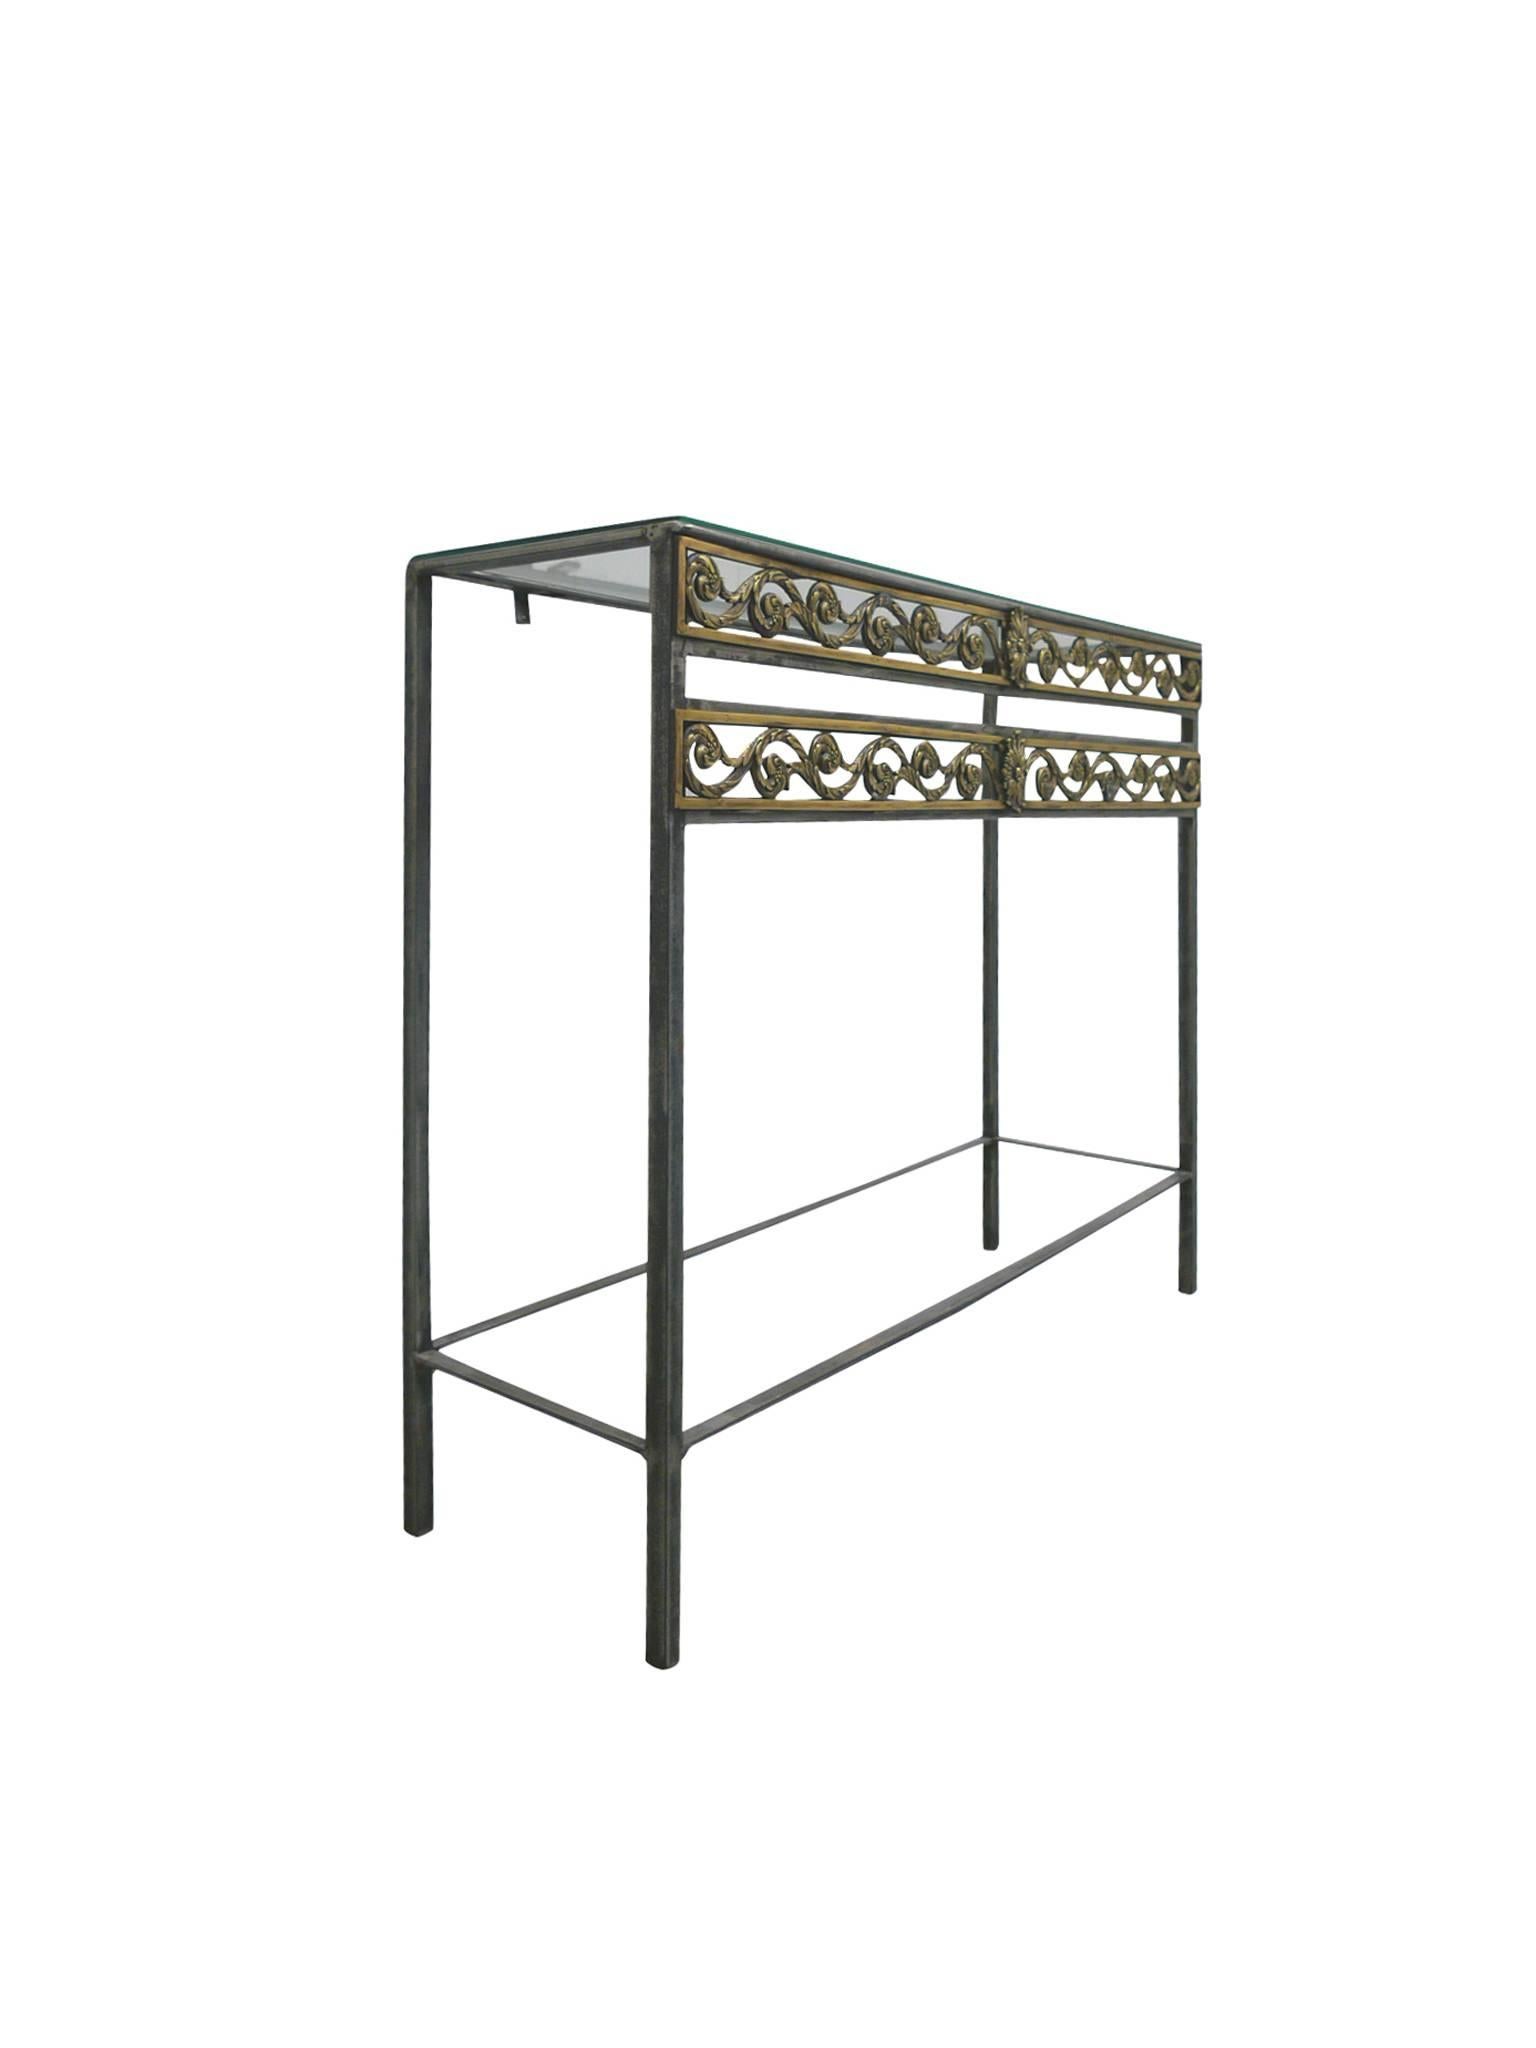 This Oscar Bach style console table is comprised of a polished steel frame with decorative brass metalwork and a 1/4-inch thick transparent glass top. The openwork structure of the console creates airiness and transparency. It's a minimalist design